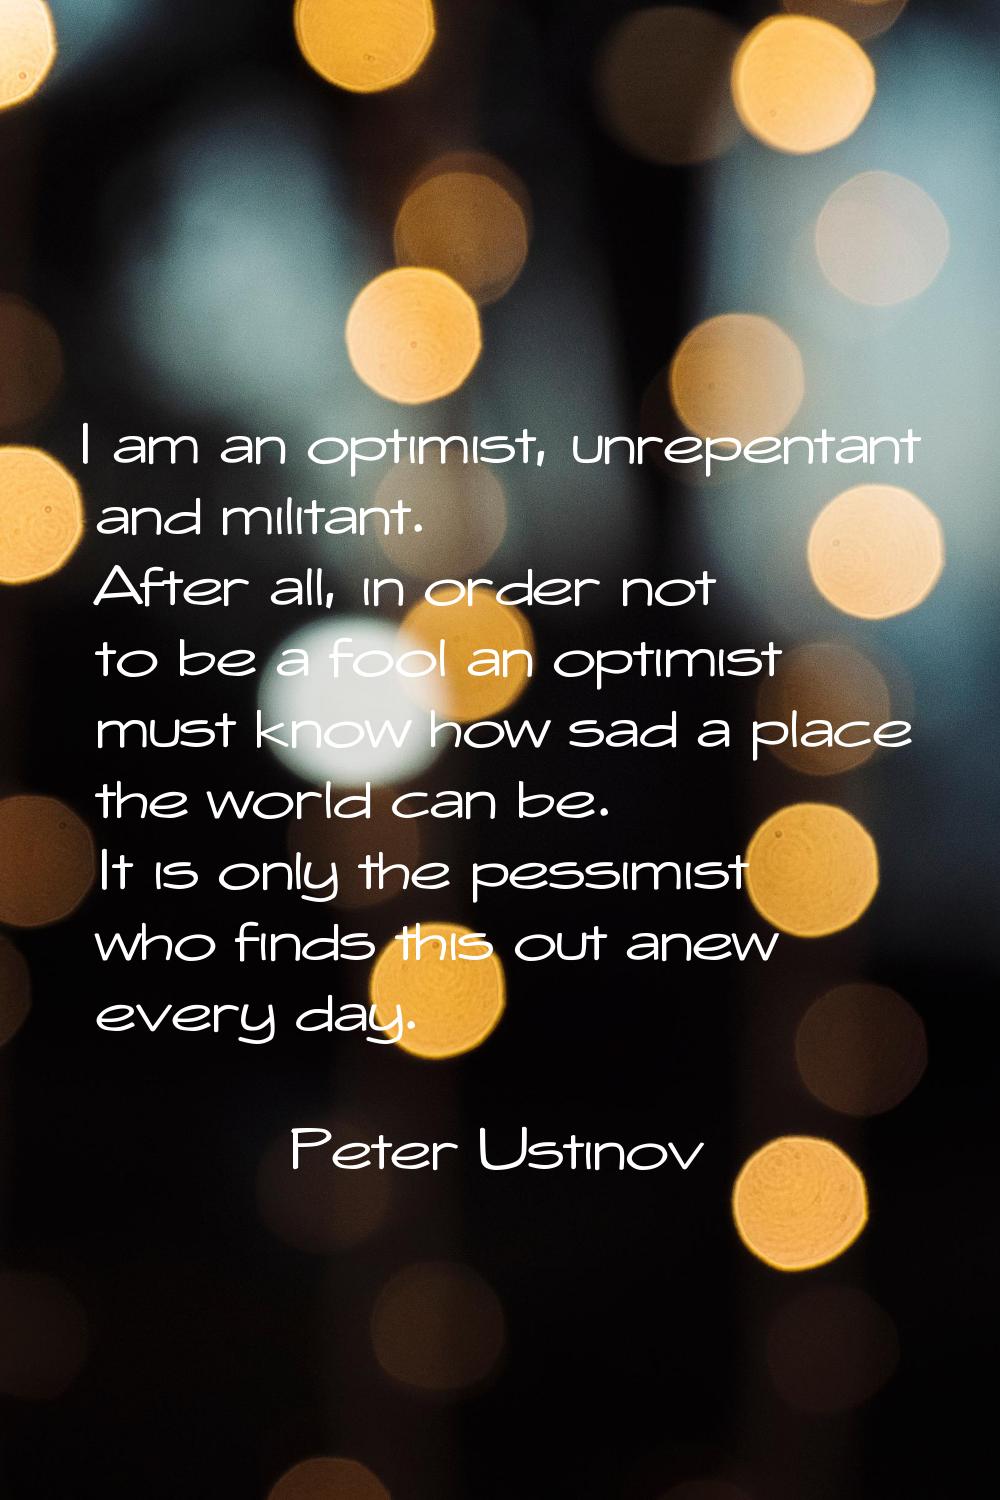 I am an optimist, unrepentant and militant. After all, in order not to be a fool an optimist must k